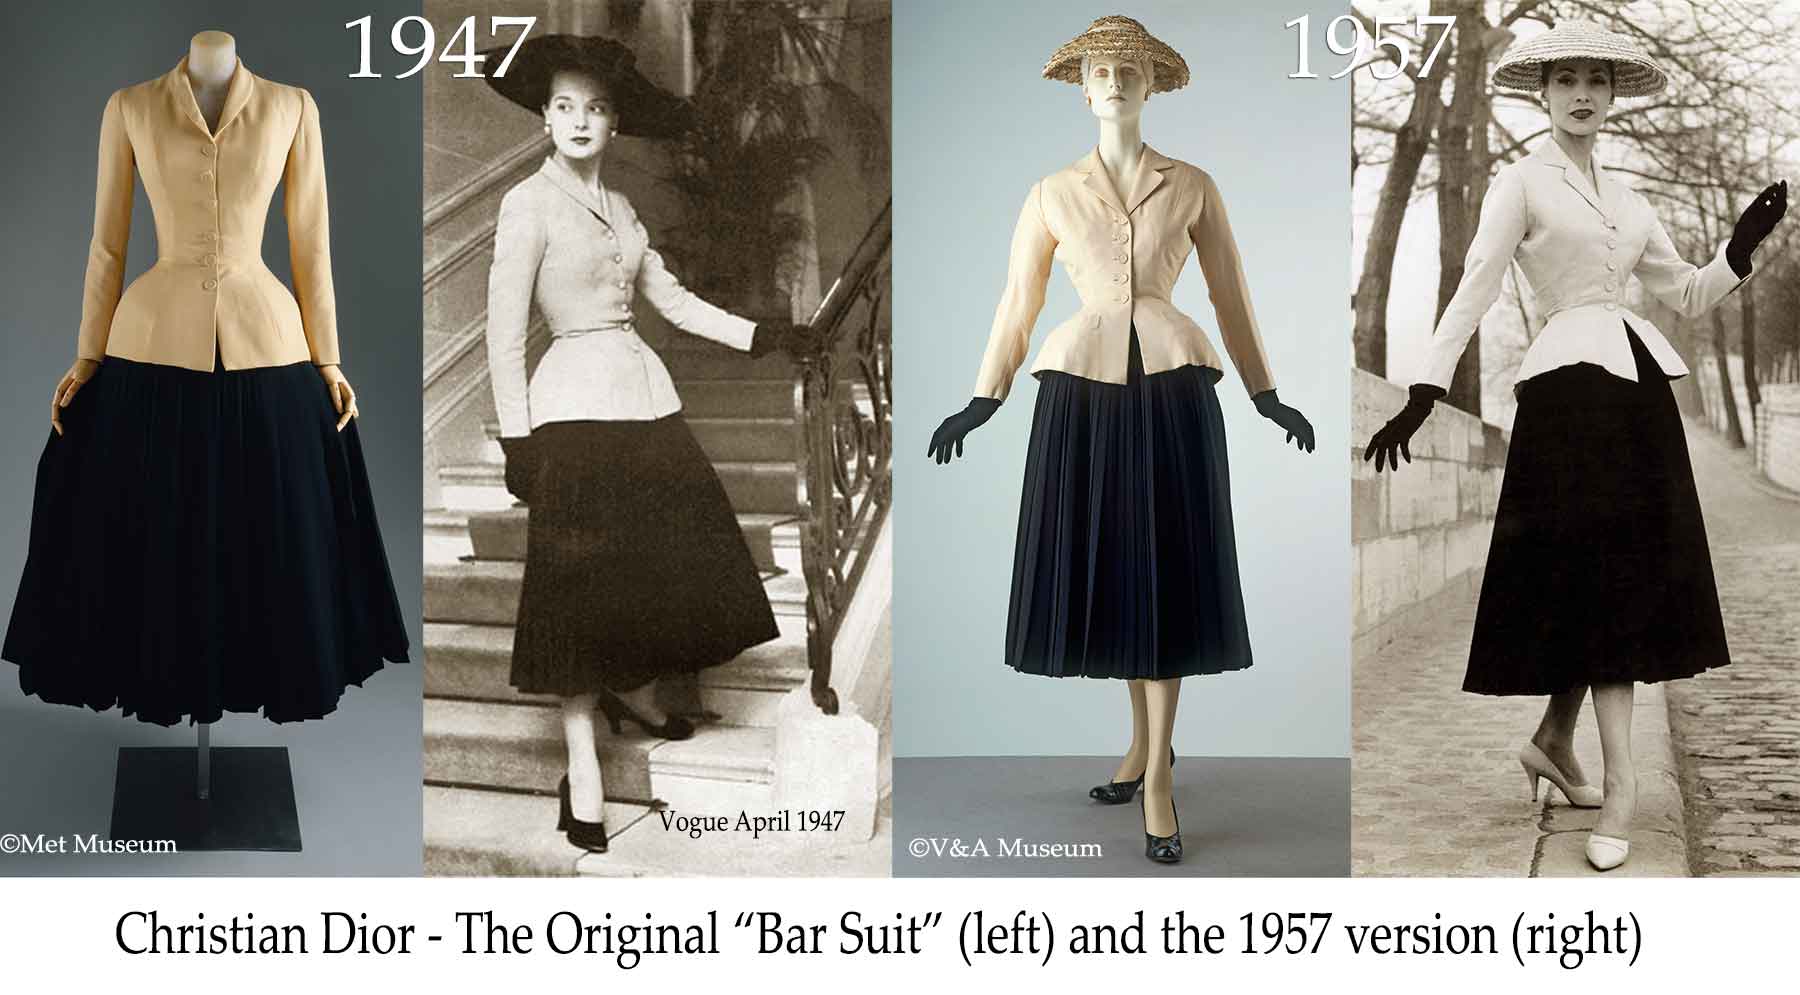 Christian-Dior-The-Original-Bar-Suit-and-the-1957-version.jpg